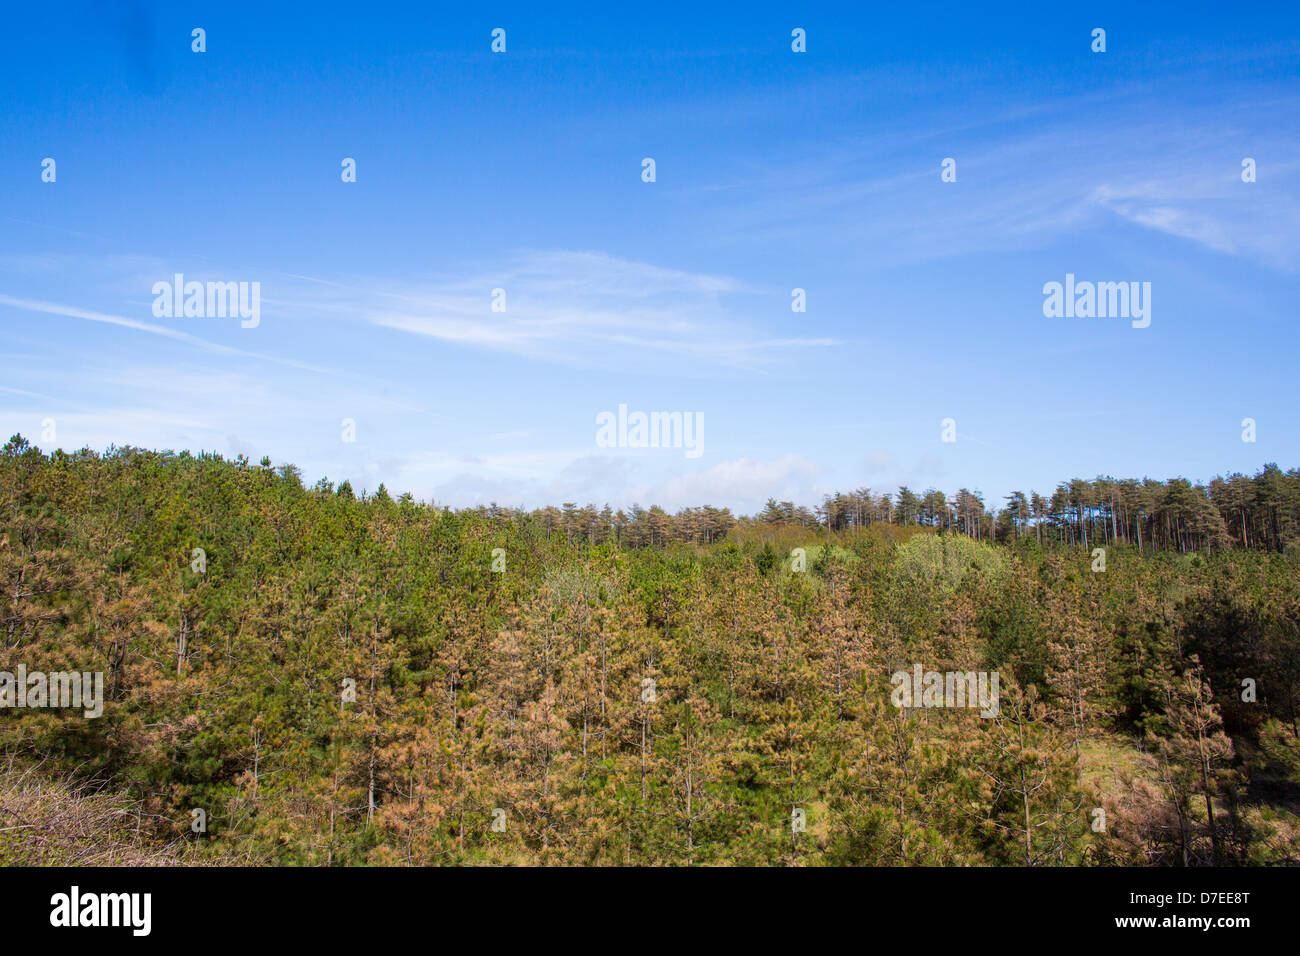 Tops of evergreen pine trees seen against a blue sky in Pembrey Country Park, Llanelli, Wales on a summer day in the sun. Stock Photo